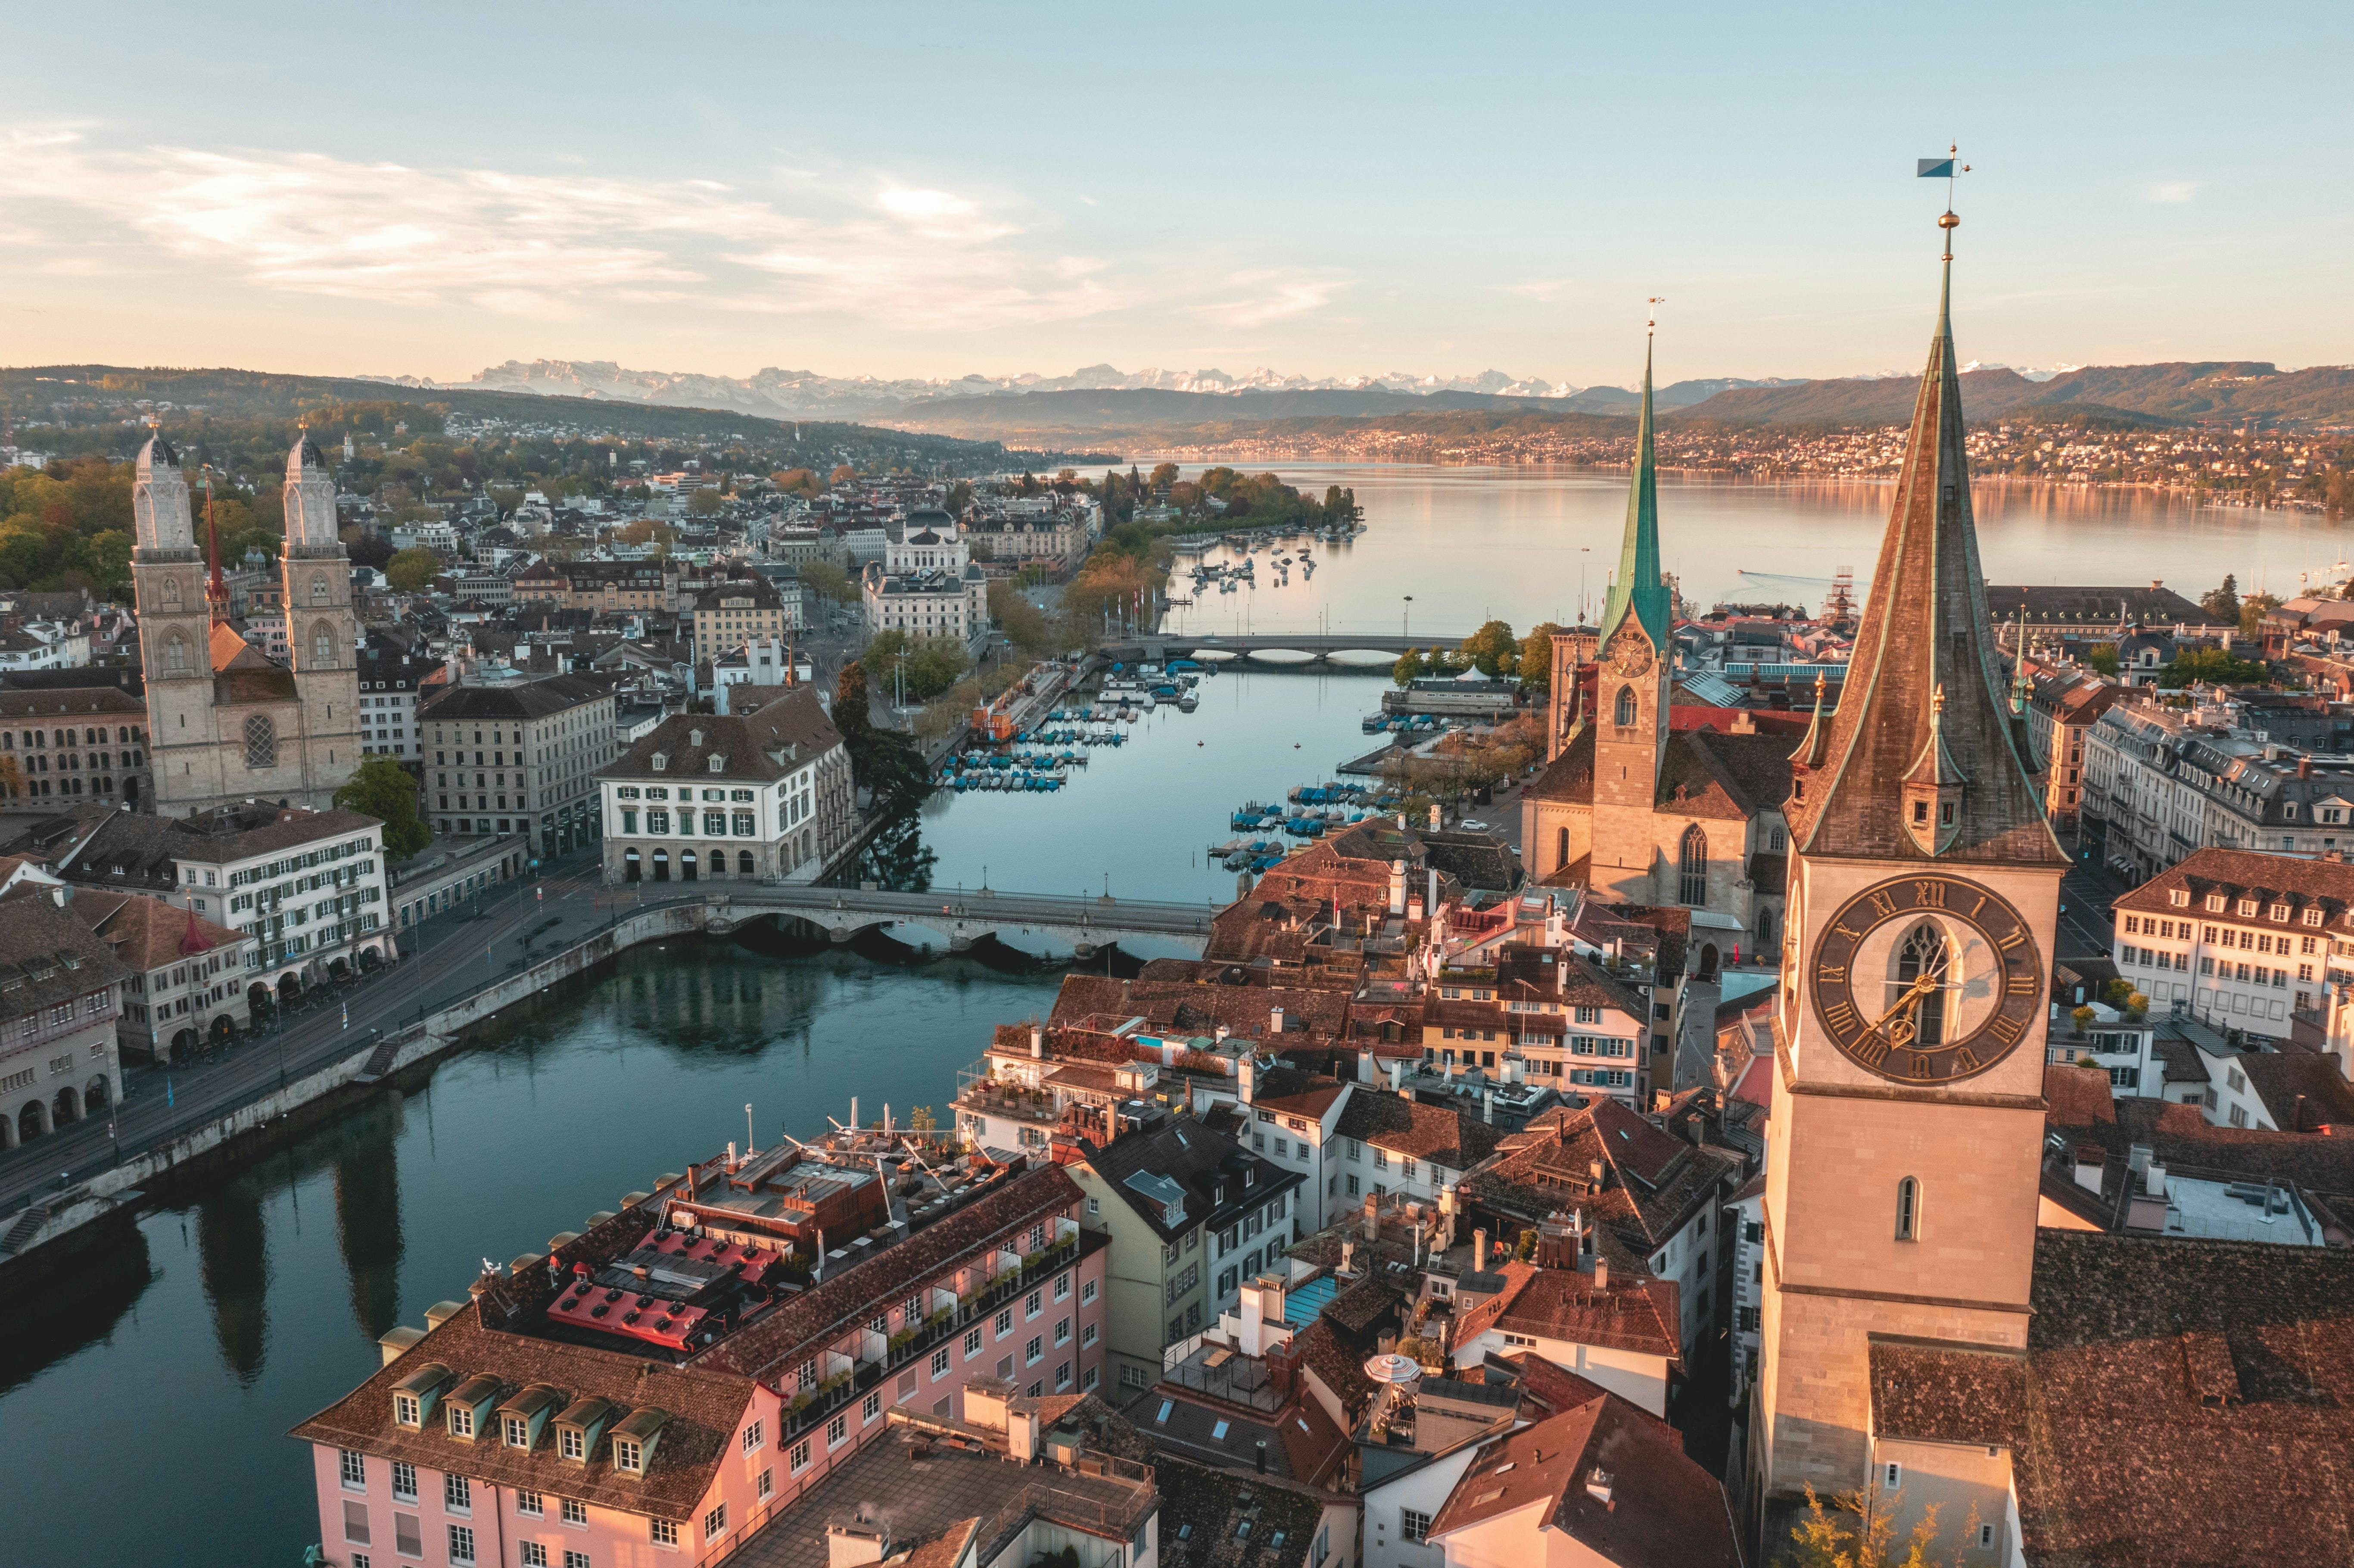 Discover Zurich's most photogenic spots with a local